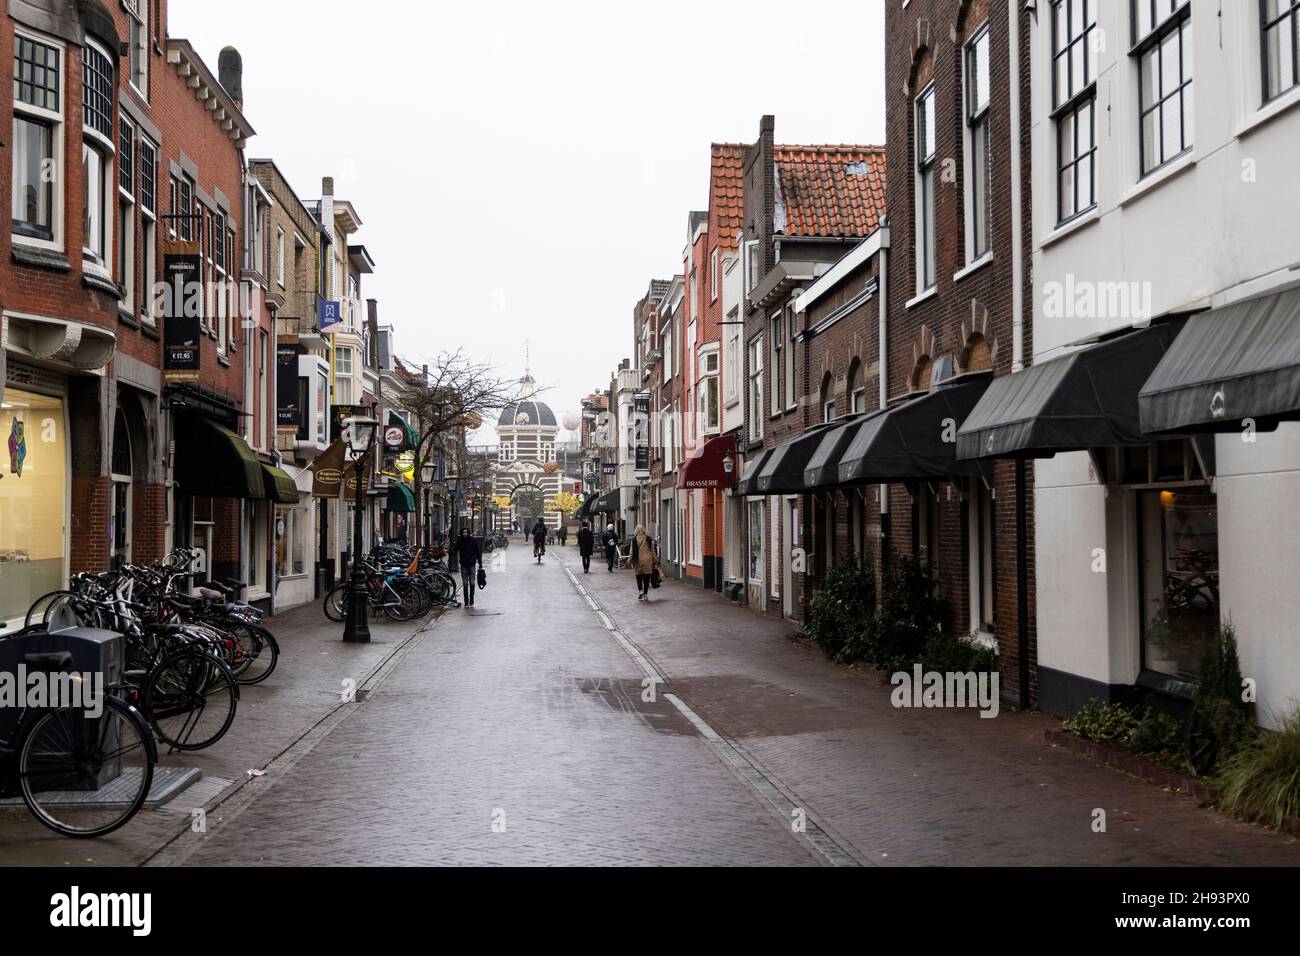 Pedestrians and bikes on Morsstraat looking toward the Morschpoort on a cloudy winter day in Leiden, Netherlands. Stock Photo